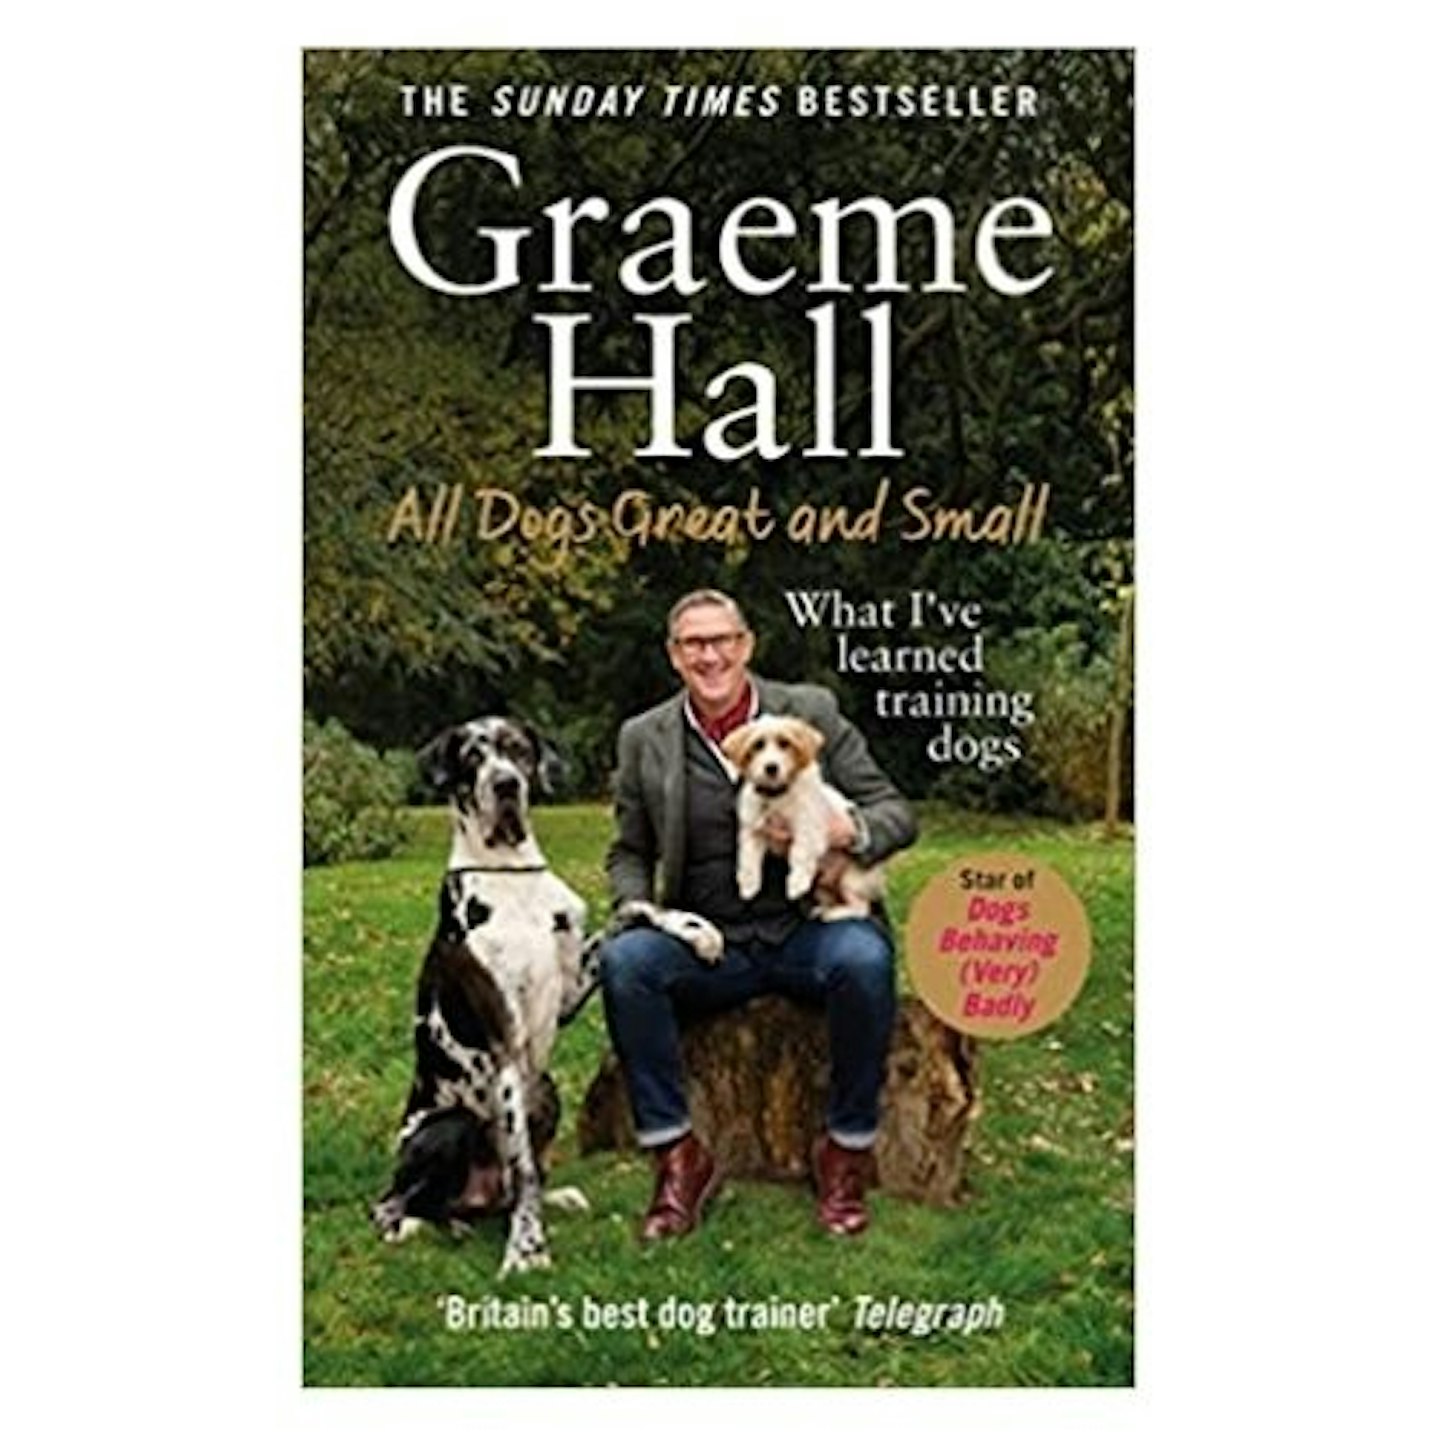 All Dogs Great and Small: What Iu2019ve learned training dogs by Graeme Hall